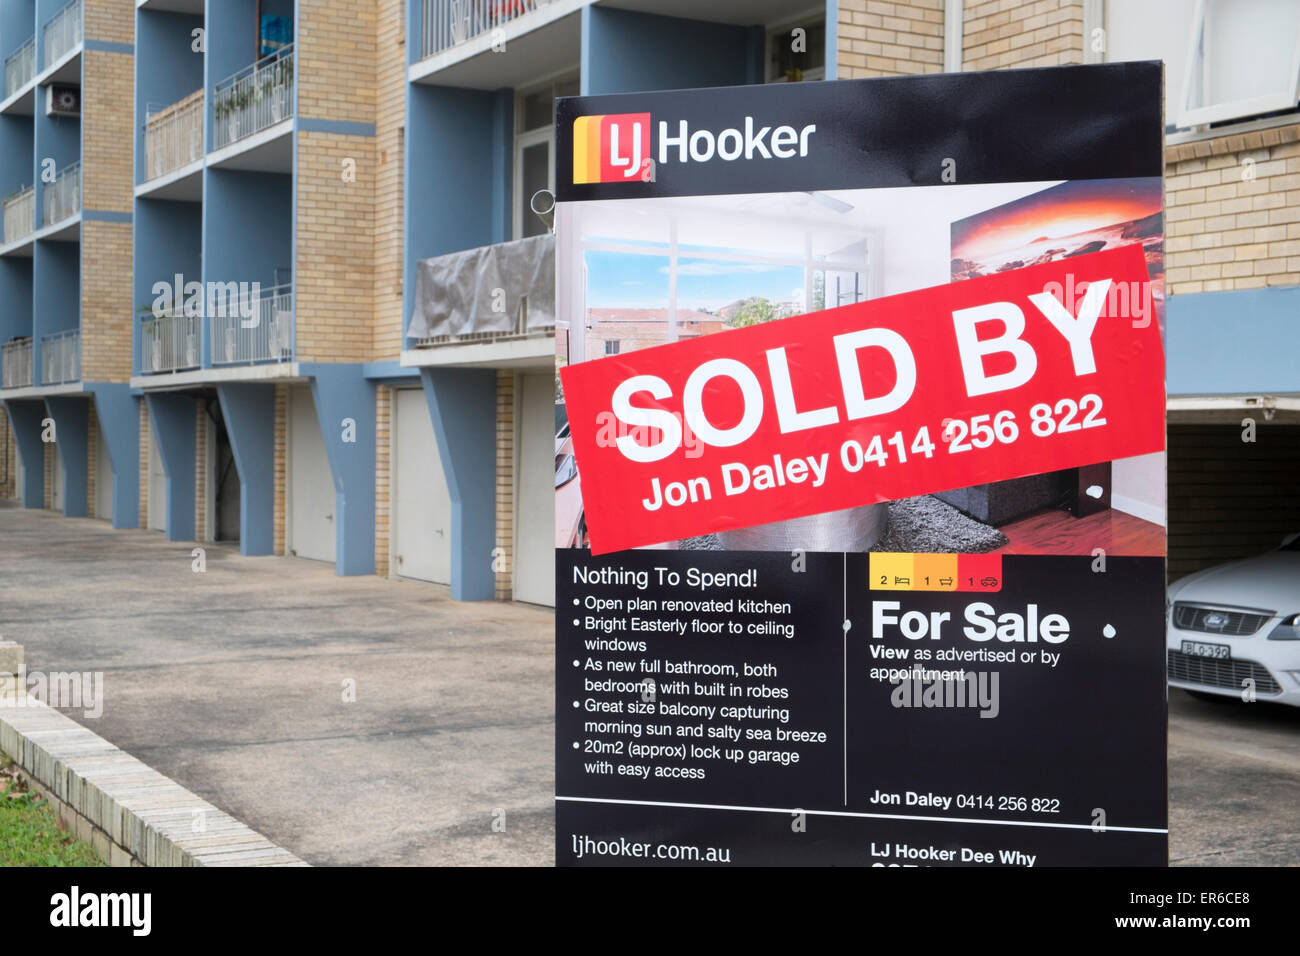 apartment unit in Dee why sold by real estate agent LJ Hooker,Sydney,Australia Stock Photo